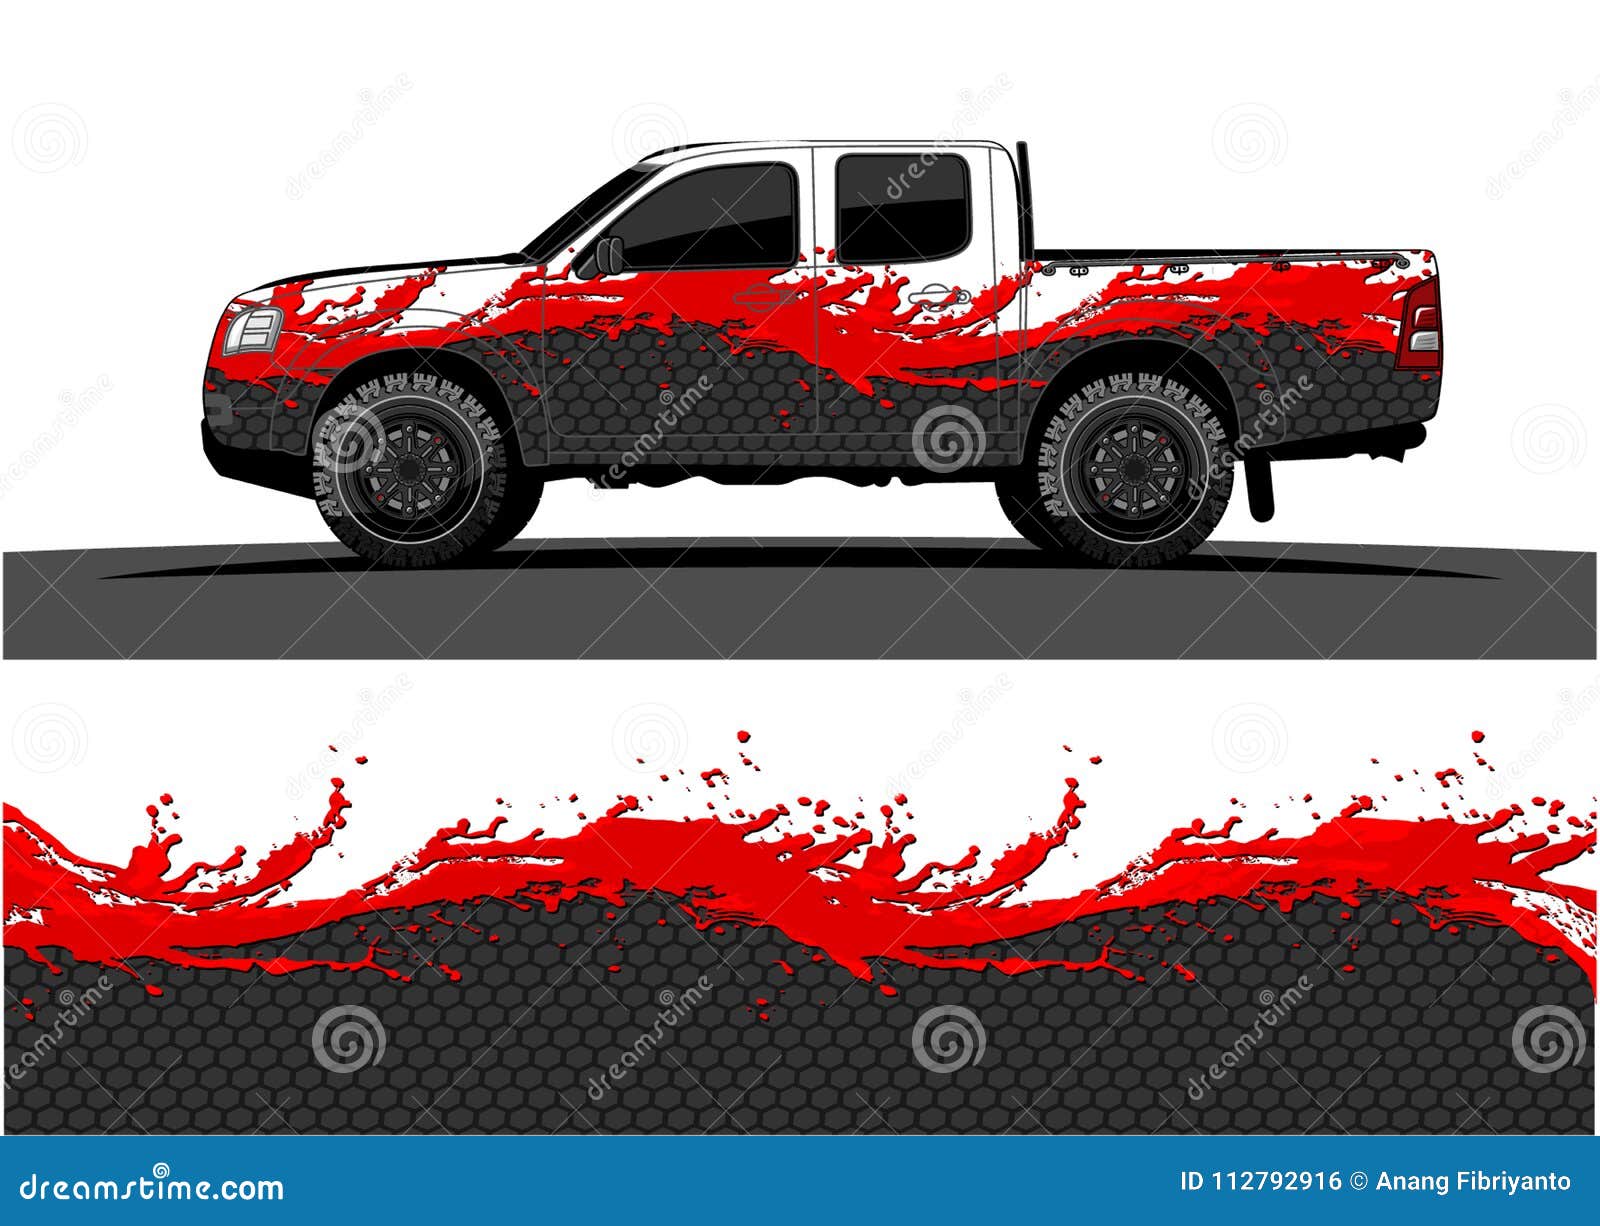 truck graphics. vehicles racing stripes background